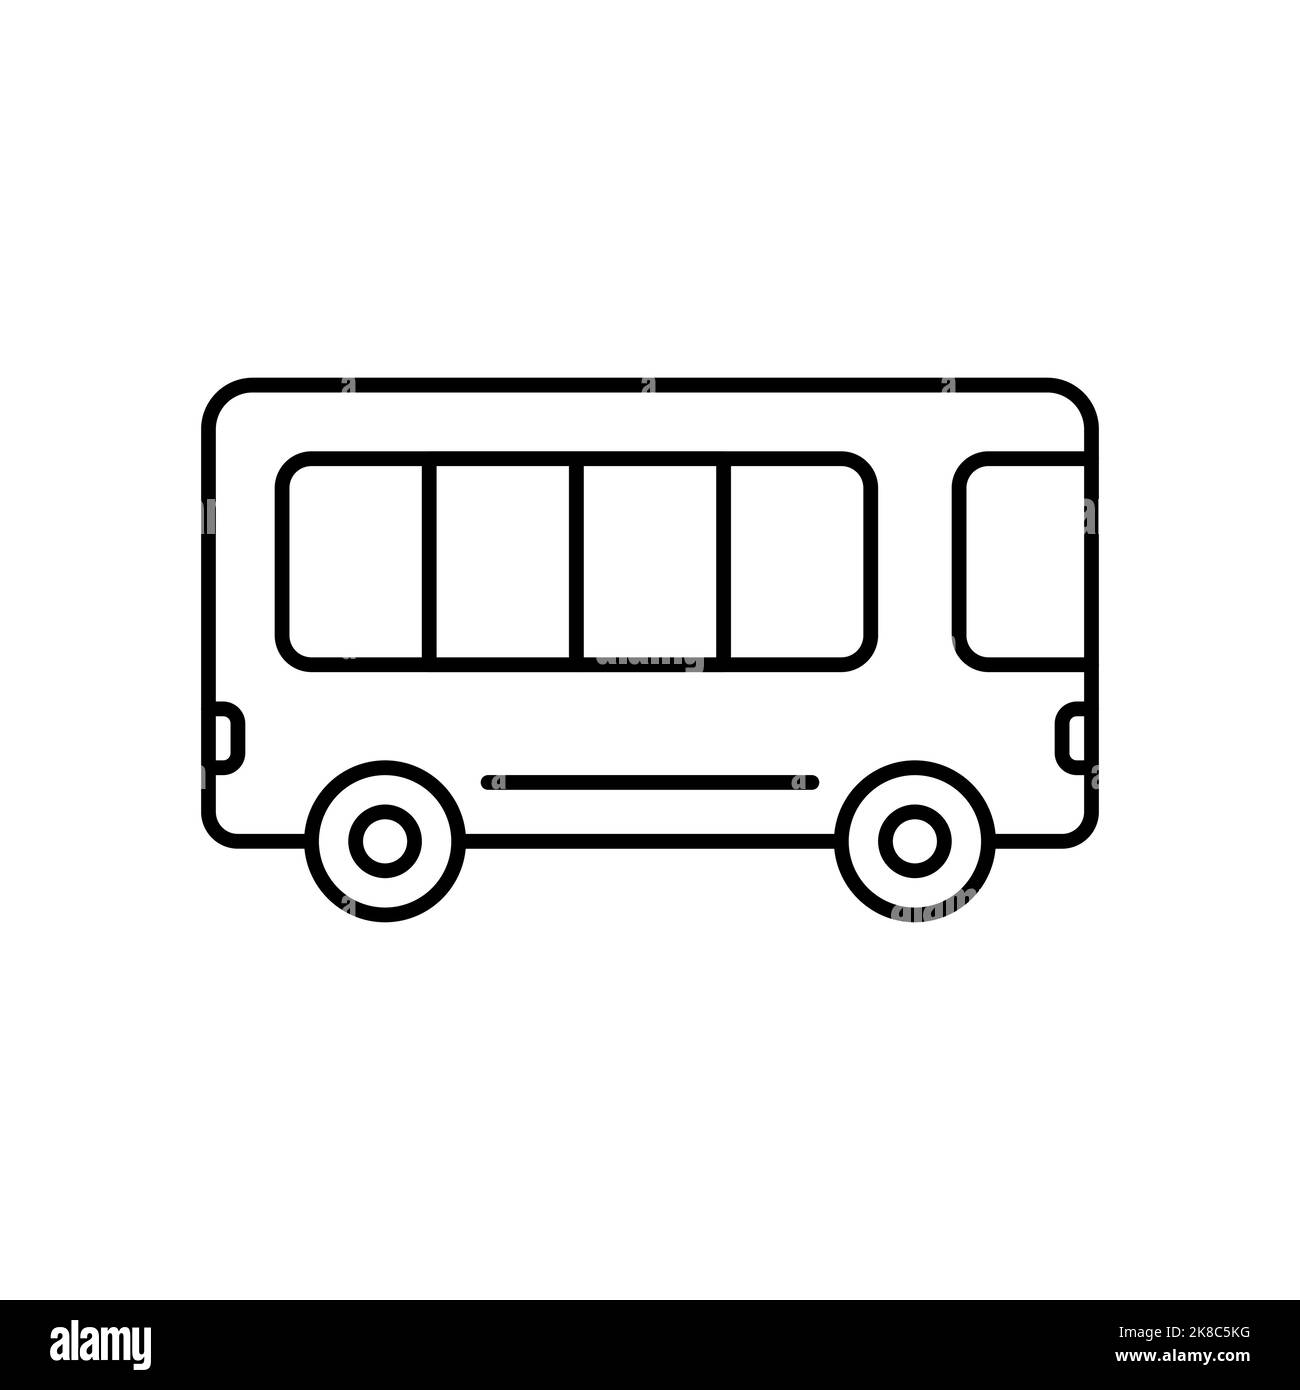 Bus Icon, Travel Anywhere by Bus, to reduce emissions. Stock Vector